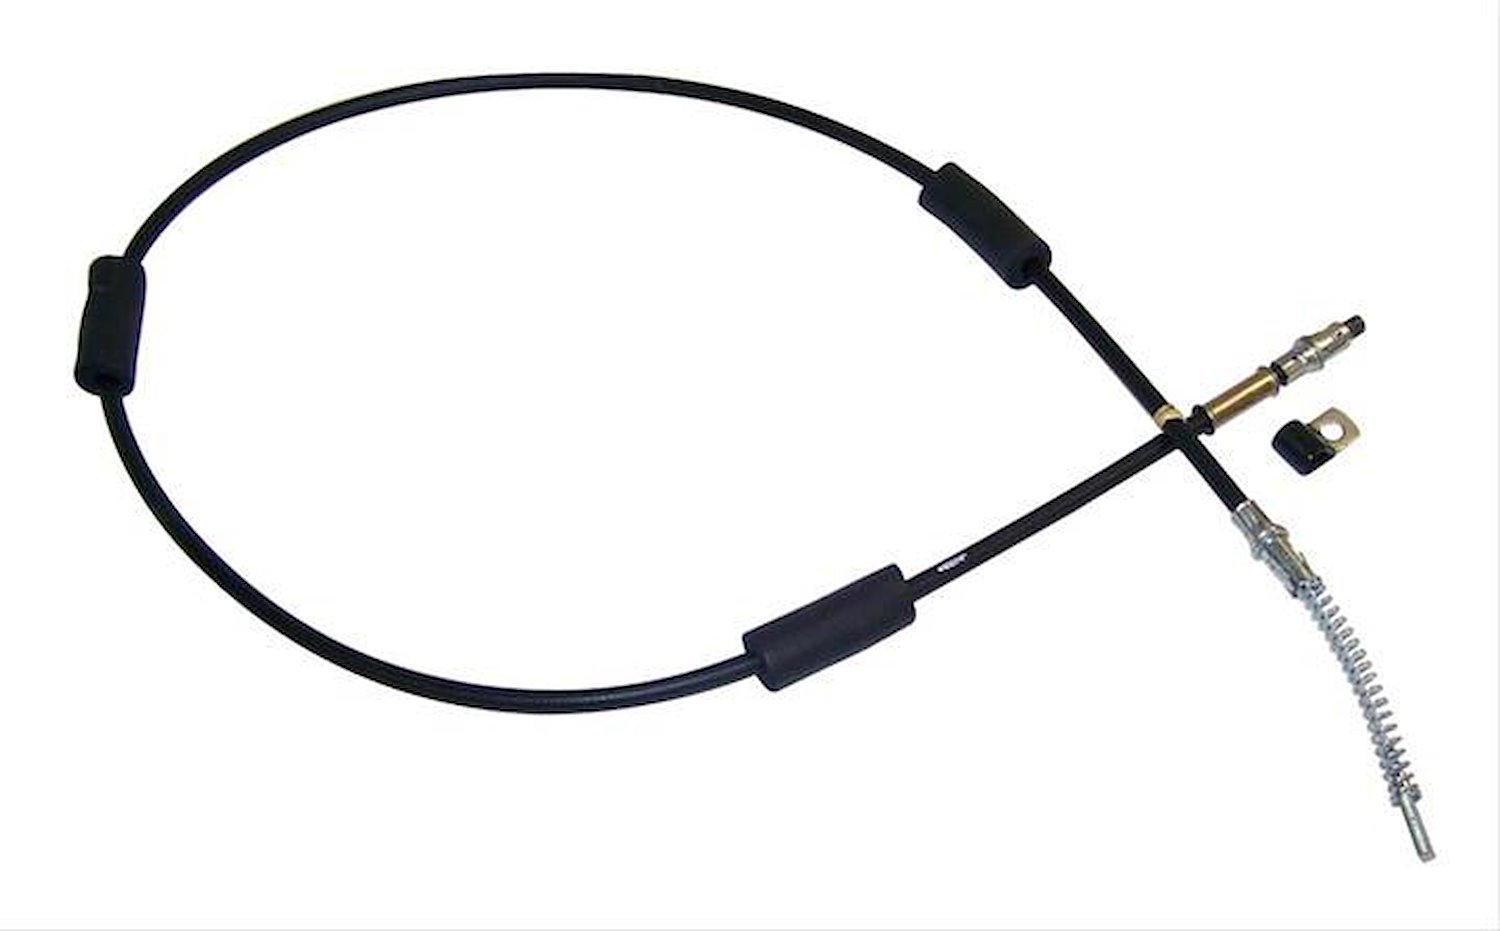 PARKING BRAKE CABLE